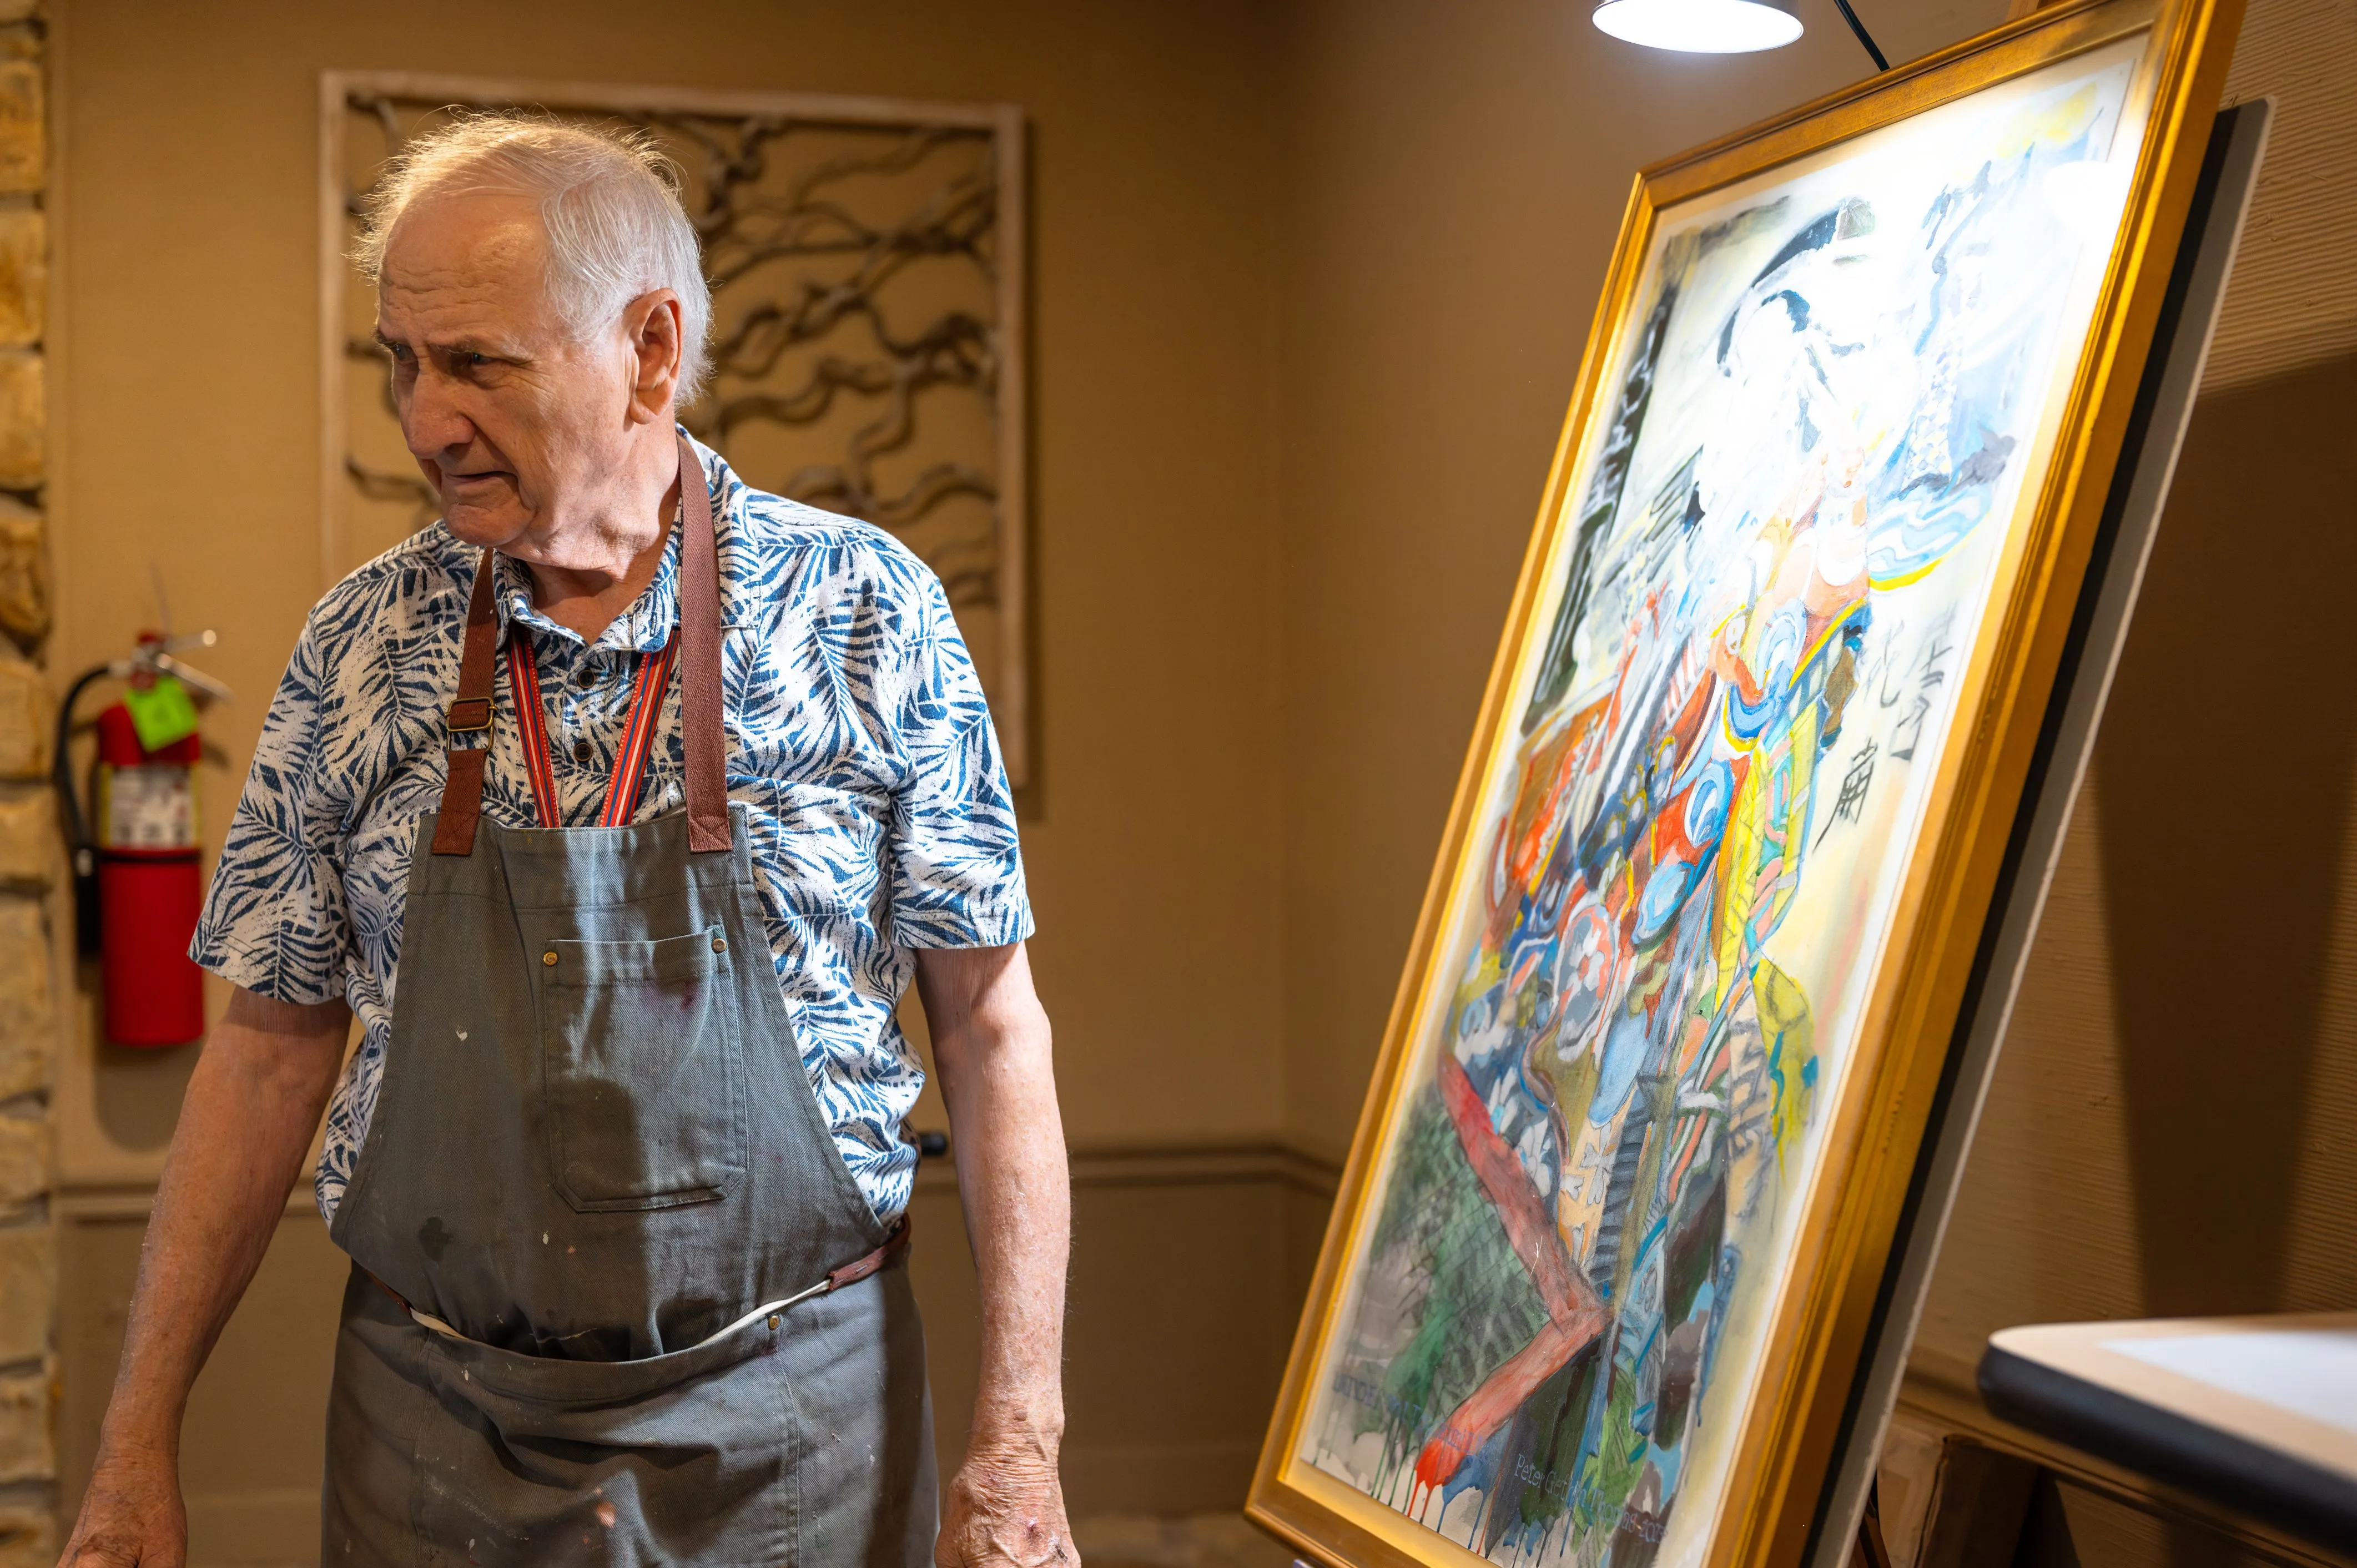 Elderly person in a patterned shirt and pants standing beside a framed colorful painting in a room with patterned wallpaper.